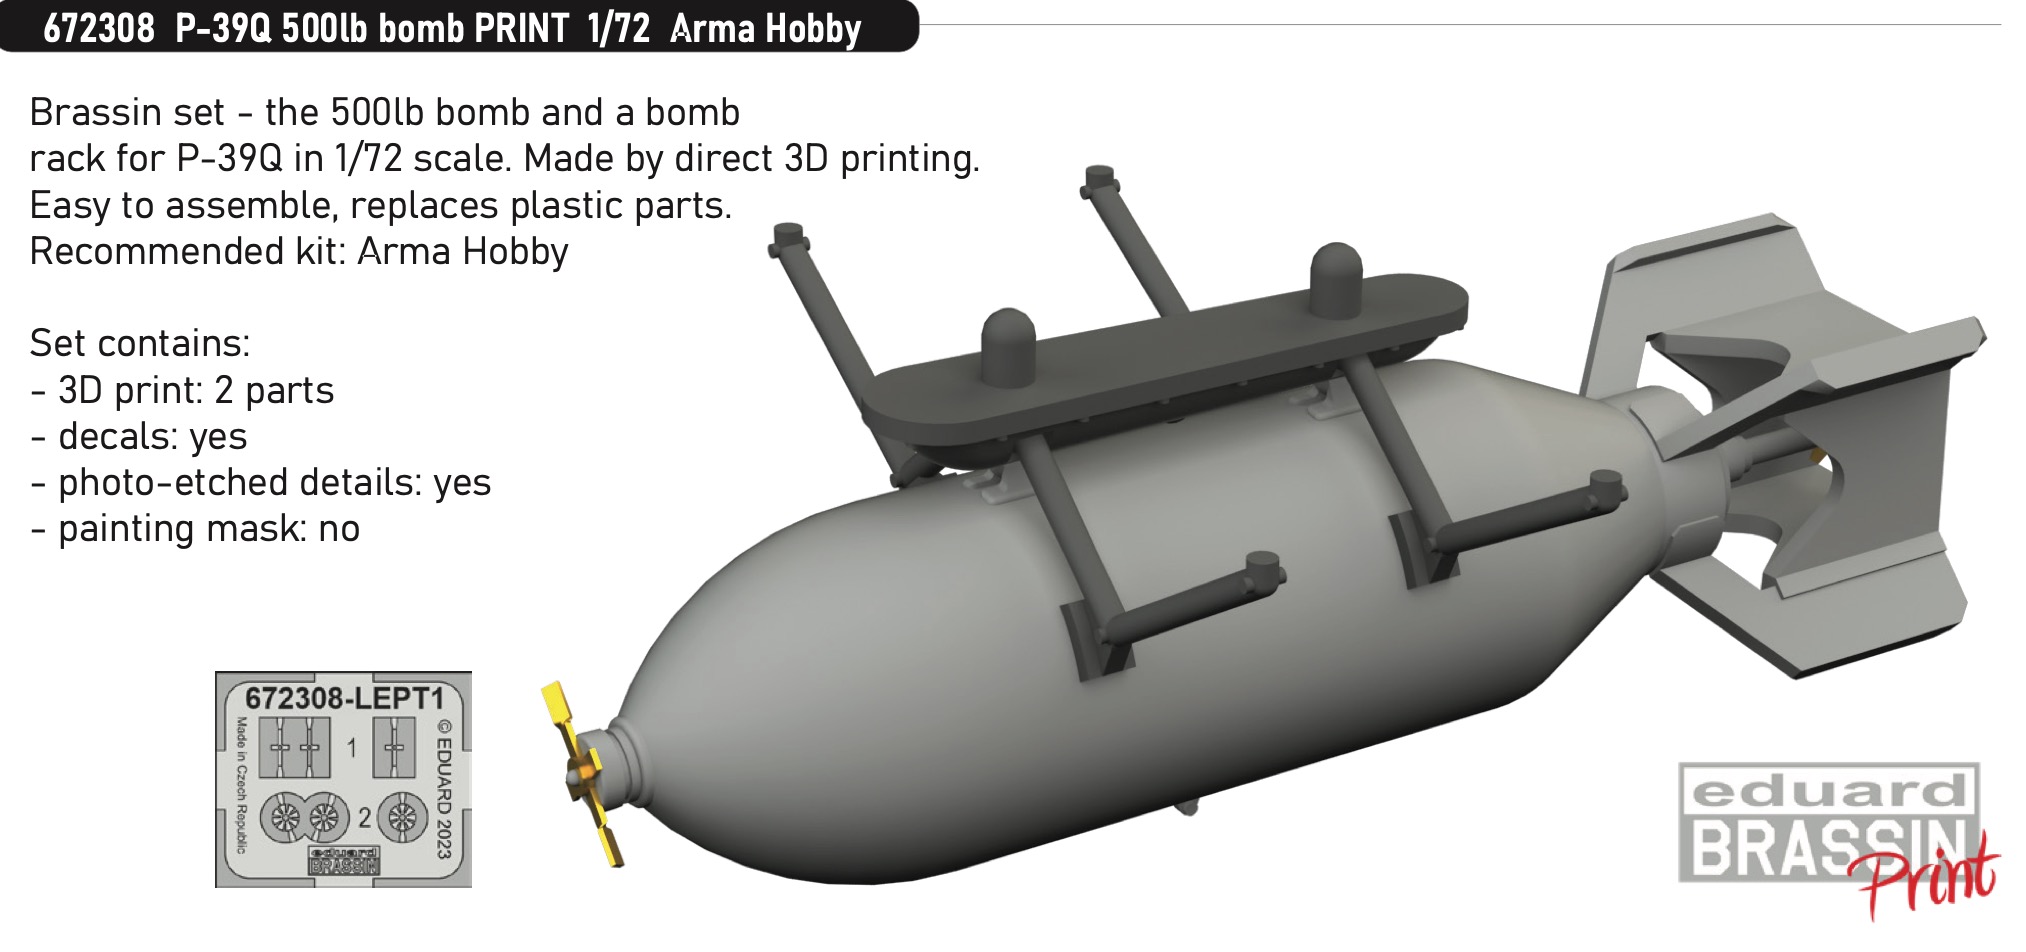 Additions (3D resin printing) 1/72 Bell P-39Q Airacobra 500lb bomb 3D-Printed (designed to be used with Arma Hobby kits)